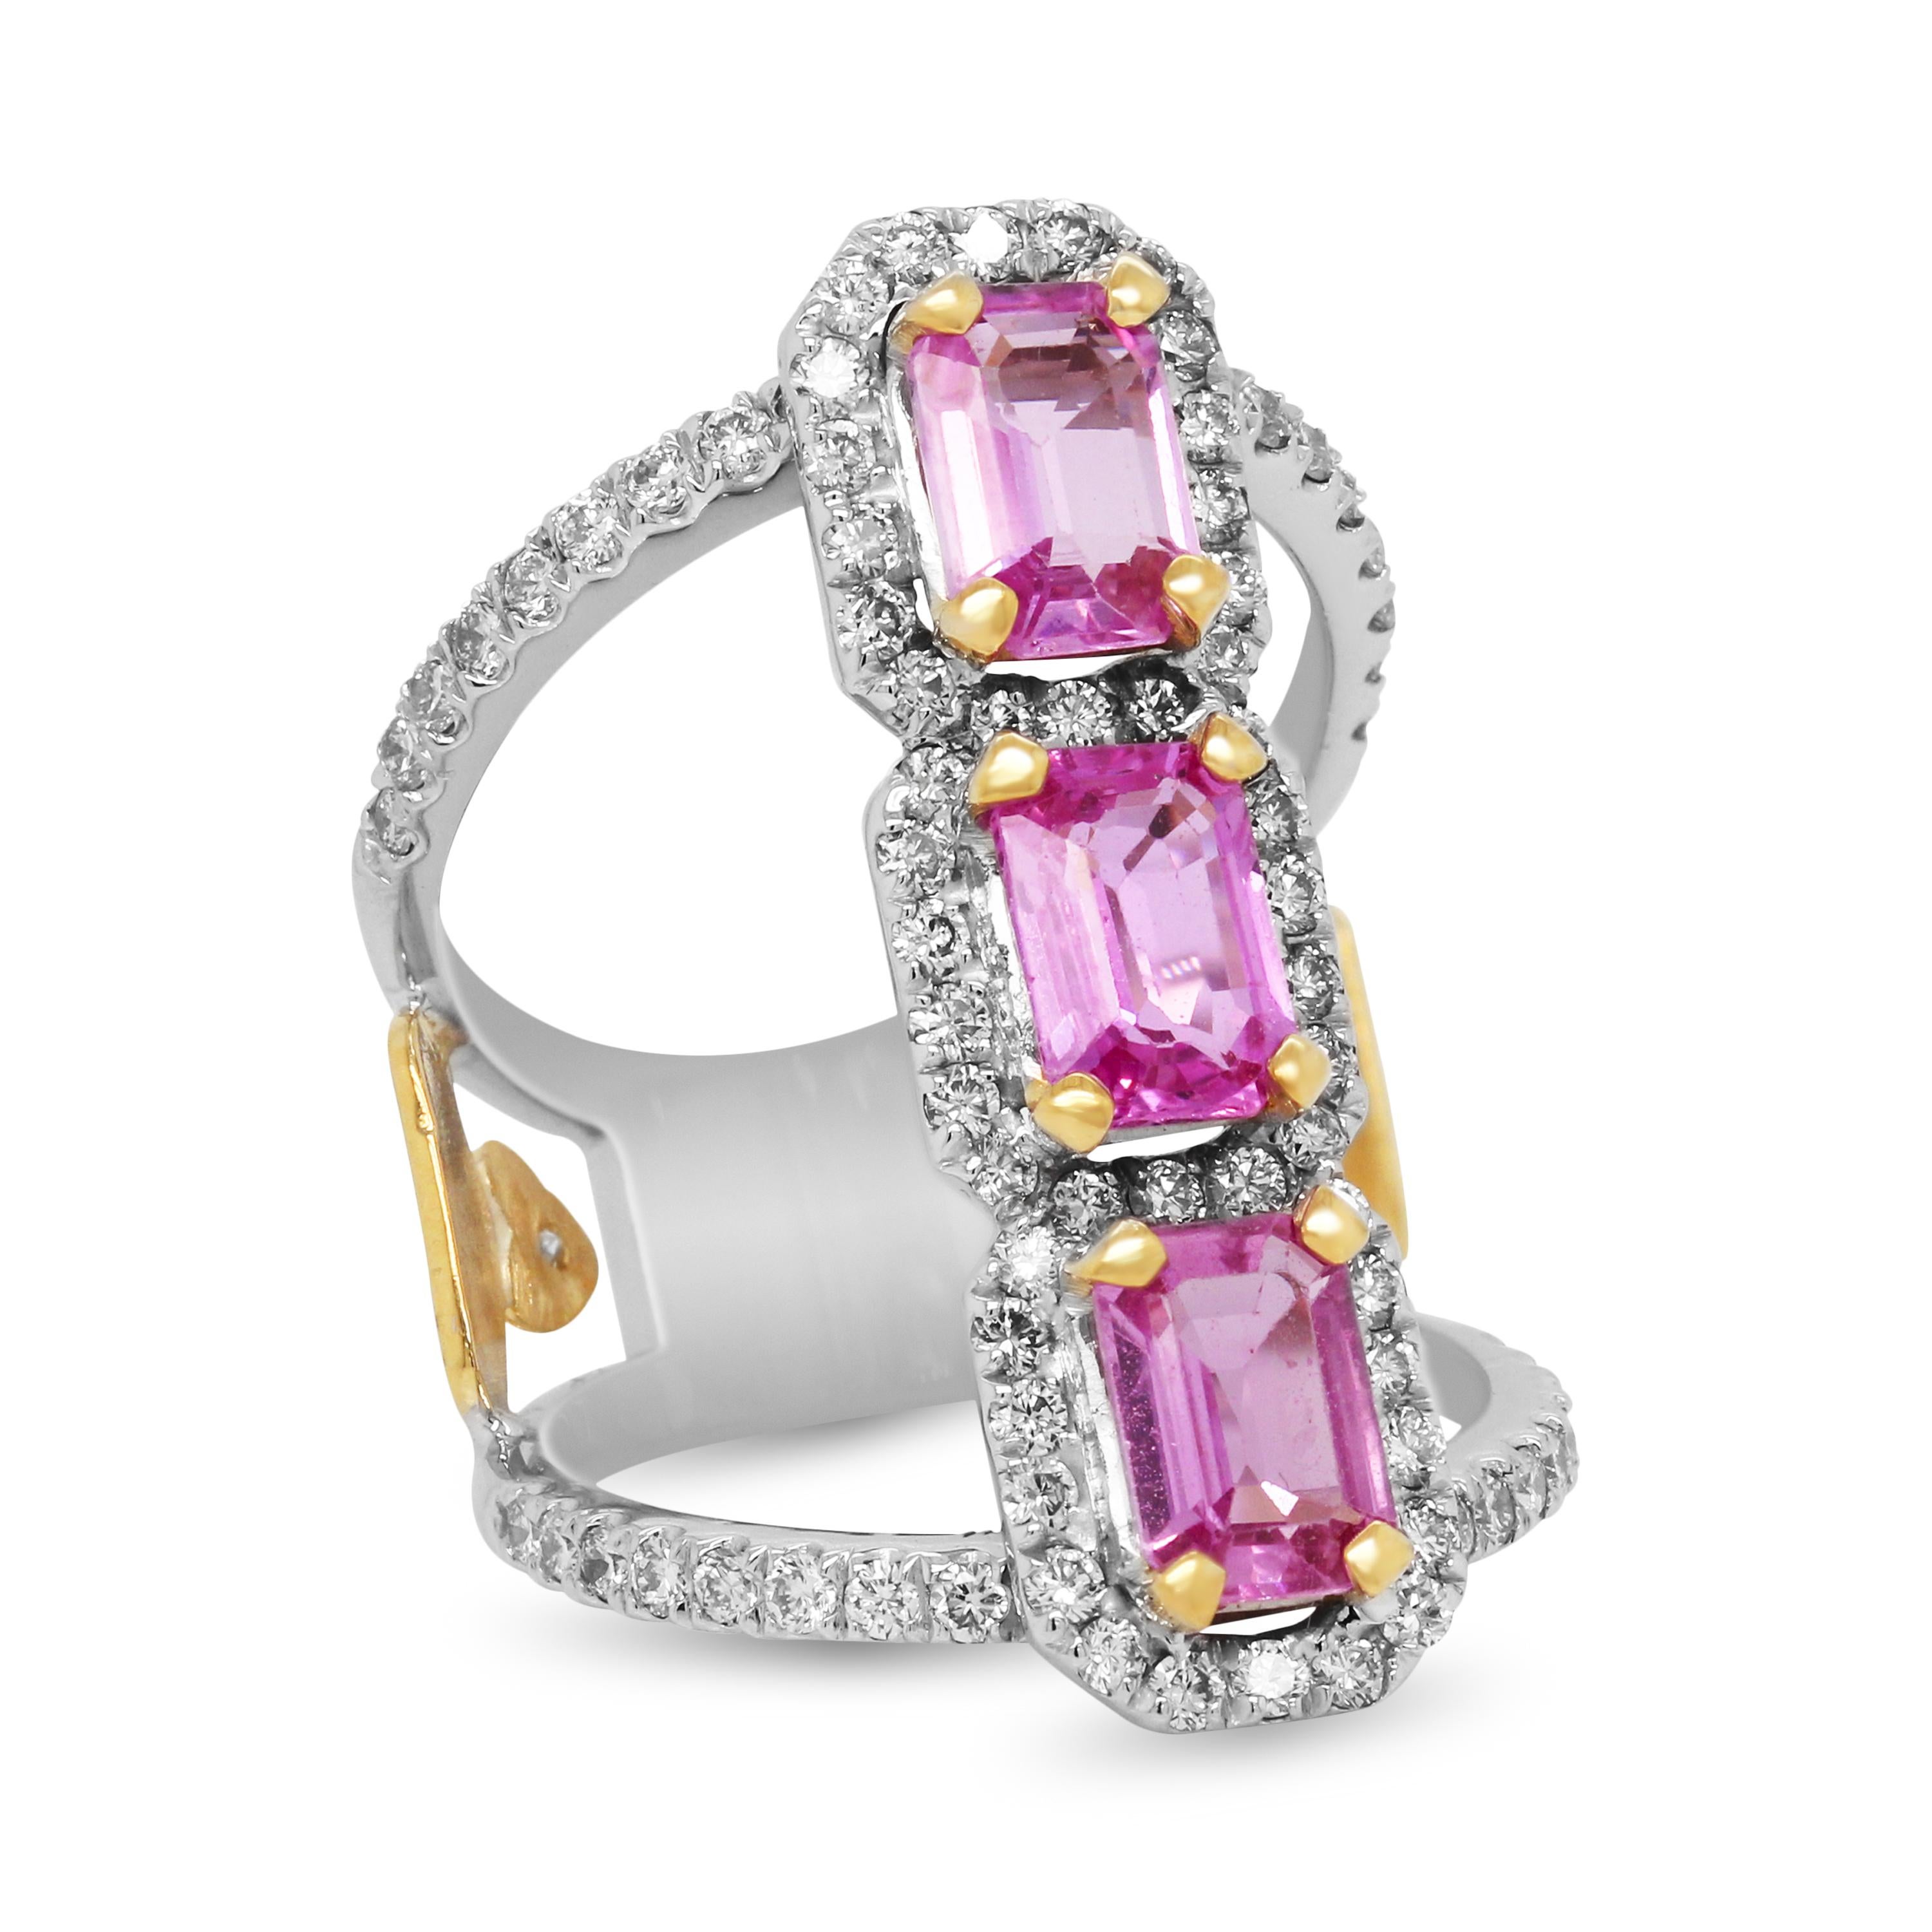 Stambolian Emerald Cut Pink Sapphire 18 Karat Gold Diamond Three Stone Ring

NO RESERVE PRICE

A beautiful three-stone ring features emerald cut Pink Sapphires with diamonds surrounding the stones and all throughout the ring set half way.

2.86